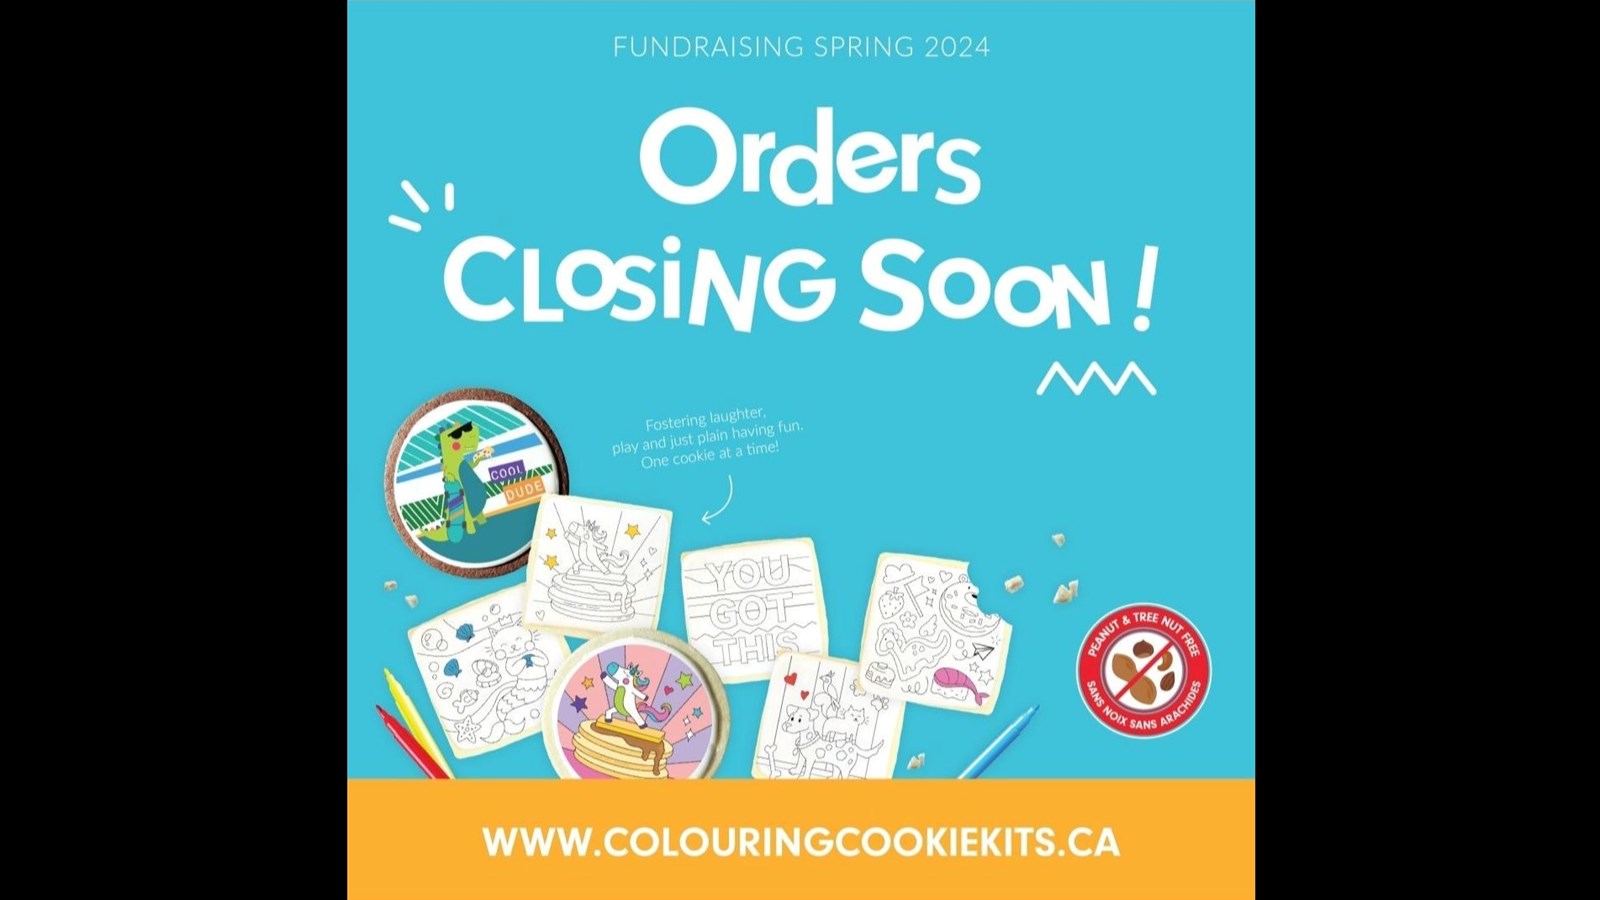 PAC COOKIE COOKIE COLOURING FUNDRAISER Closes Today February 28, 2024